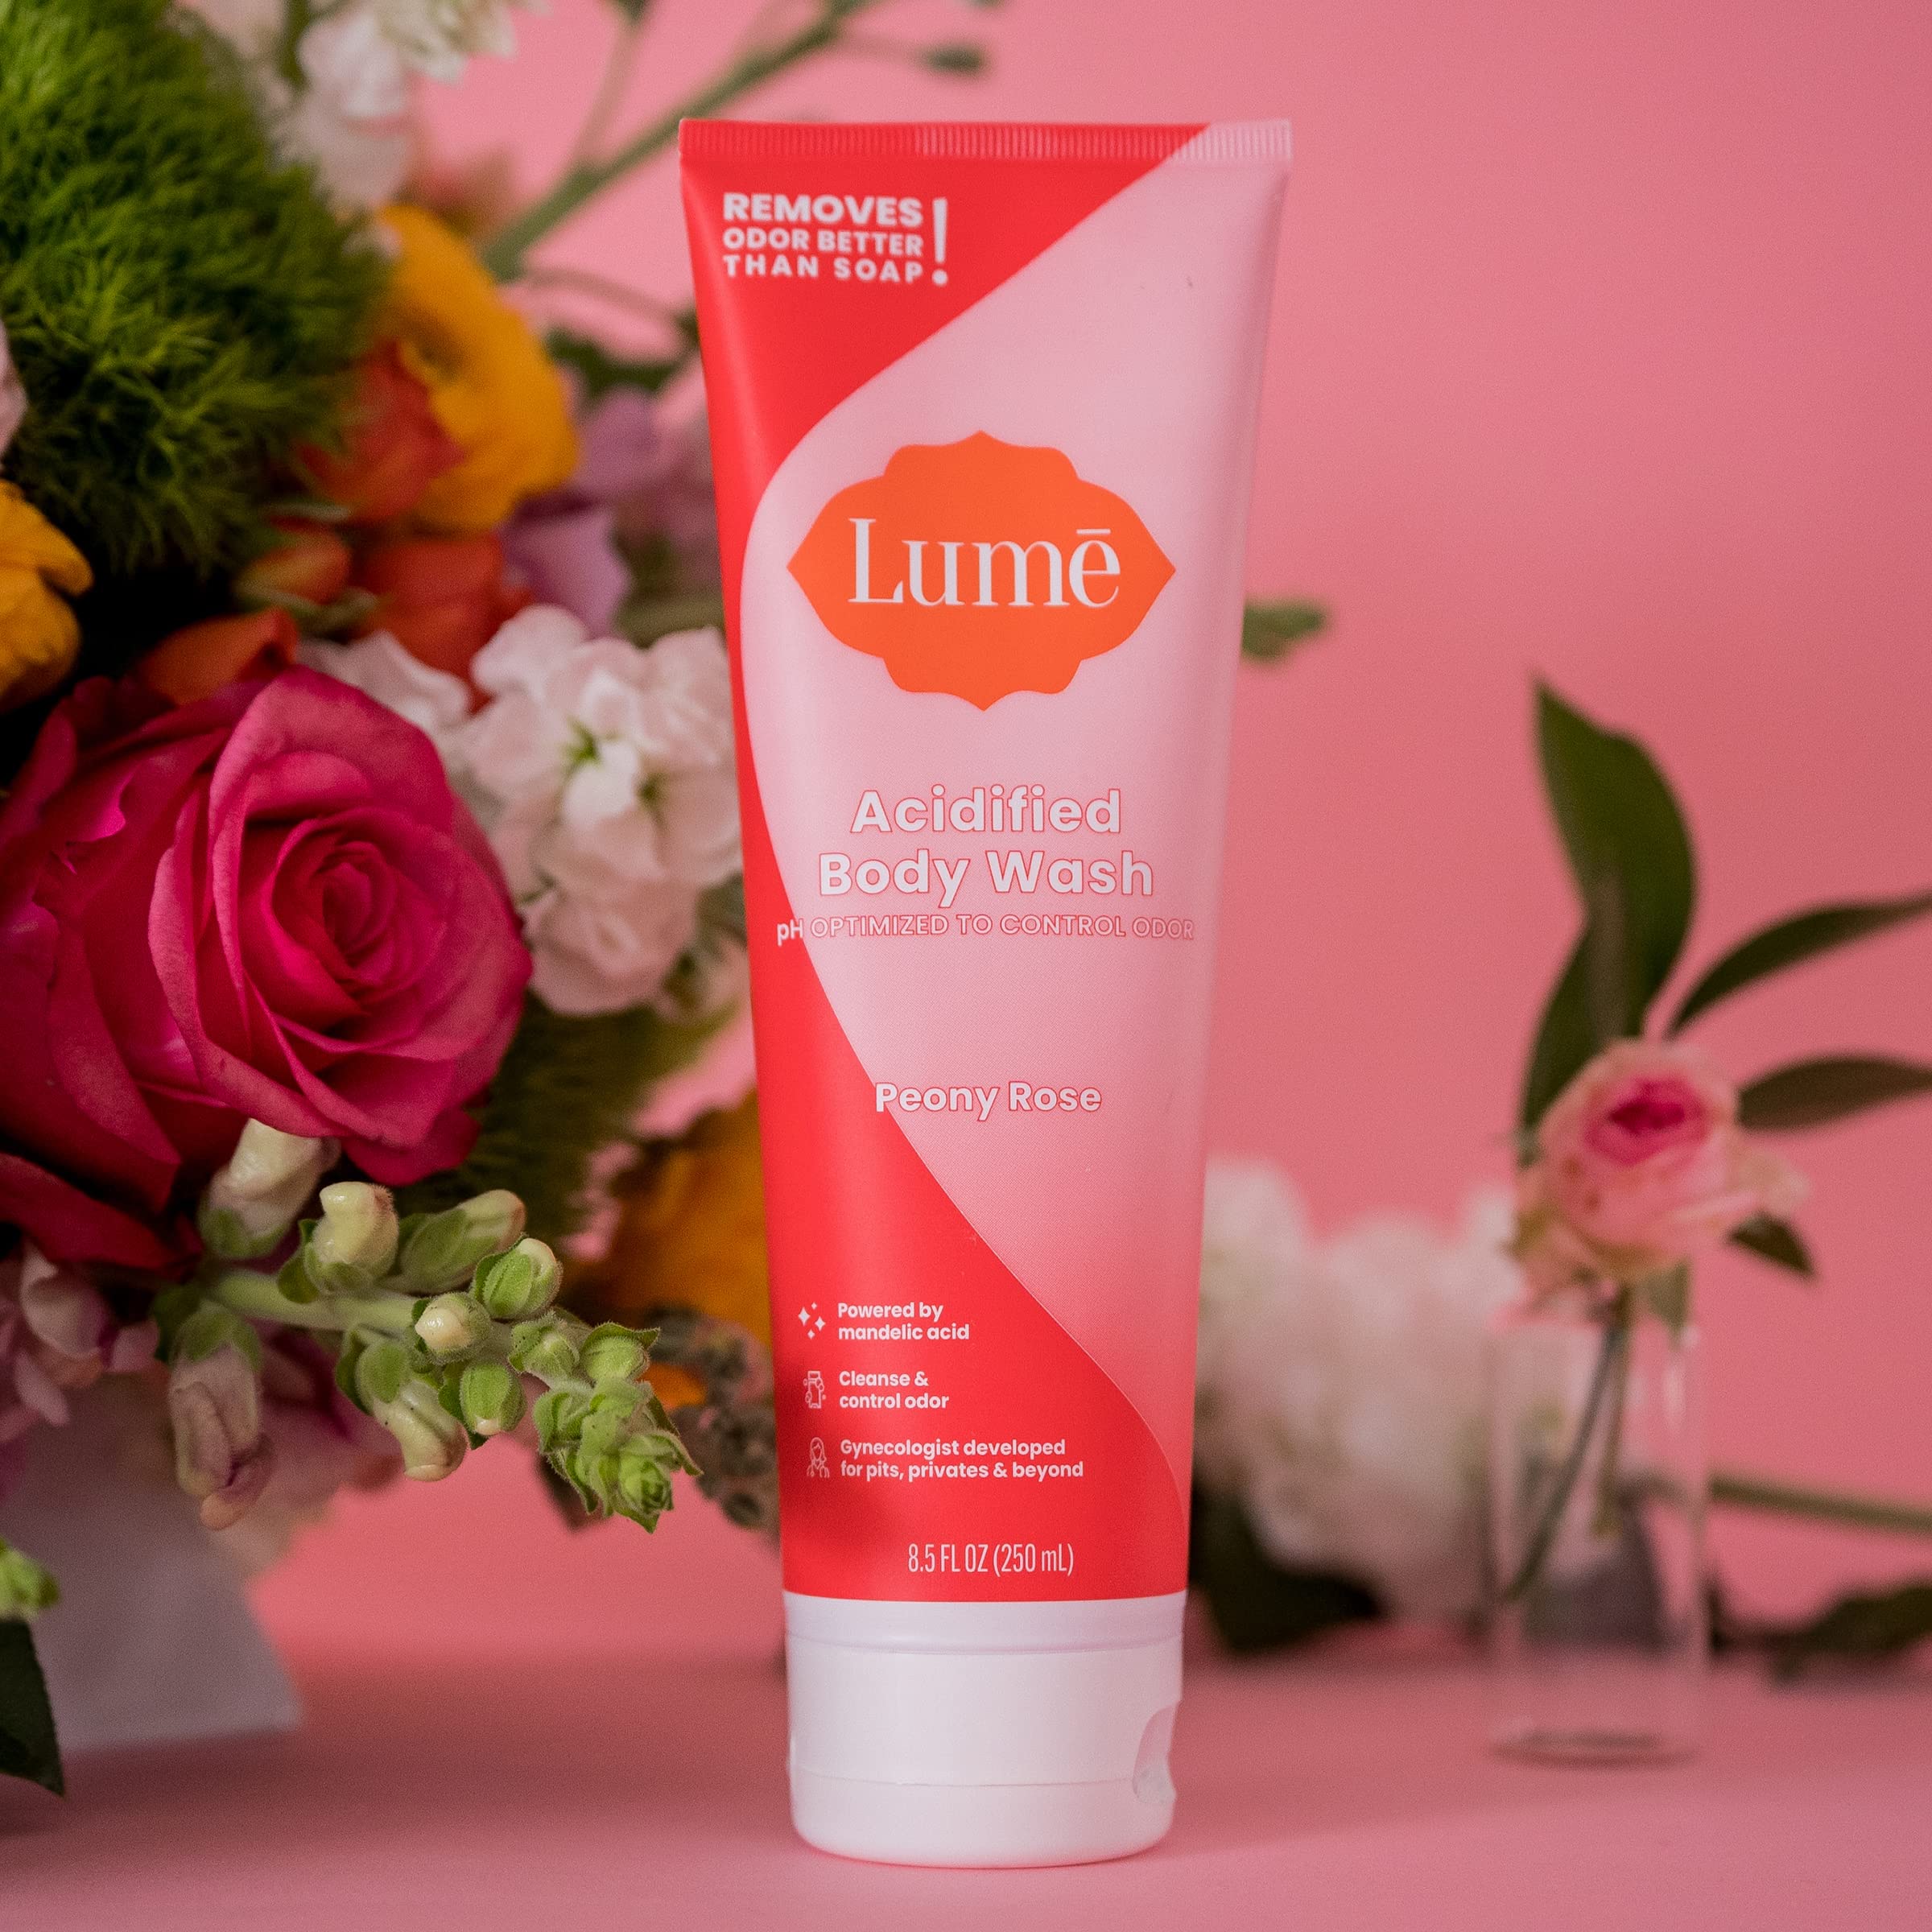 Lume Acidified Body Wash - 24 Hour Odor Control - Removes Odor Better than Soap - Moisturizing Formula - SLS Free, Paraben Free - Safe For Sensitive Skin - 8.5 ounce (Peony Rose)